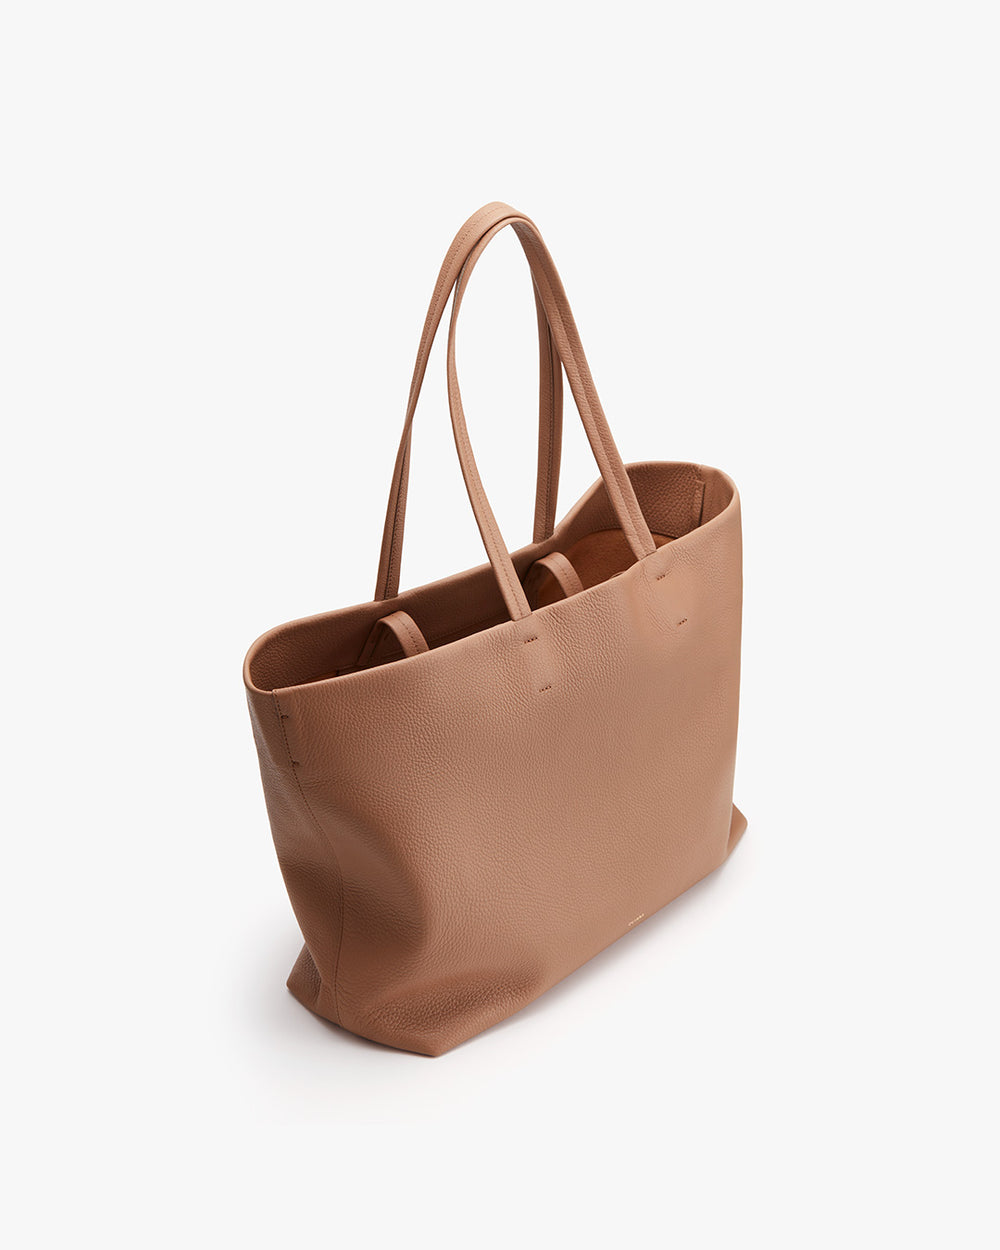 Tote bag with two handles on a plain background.